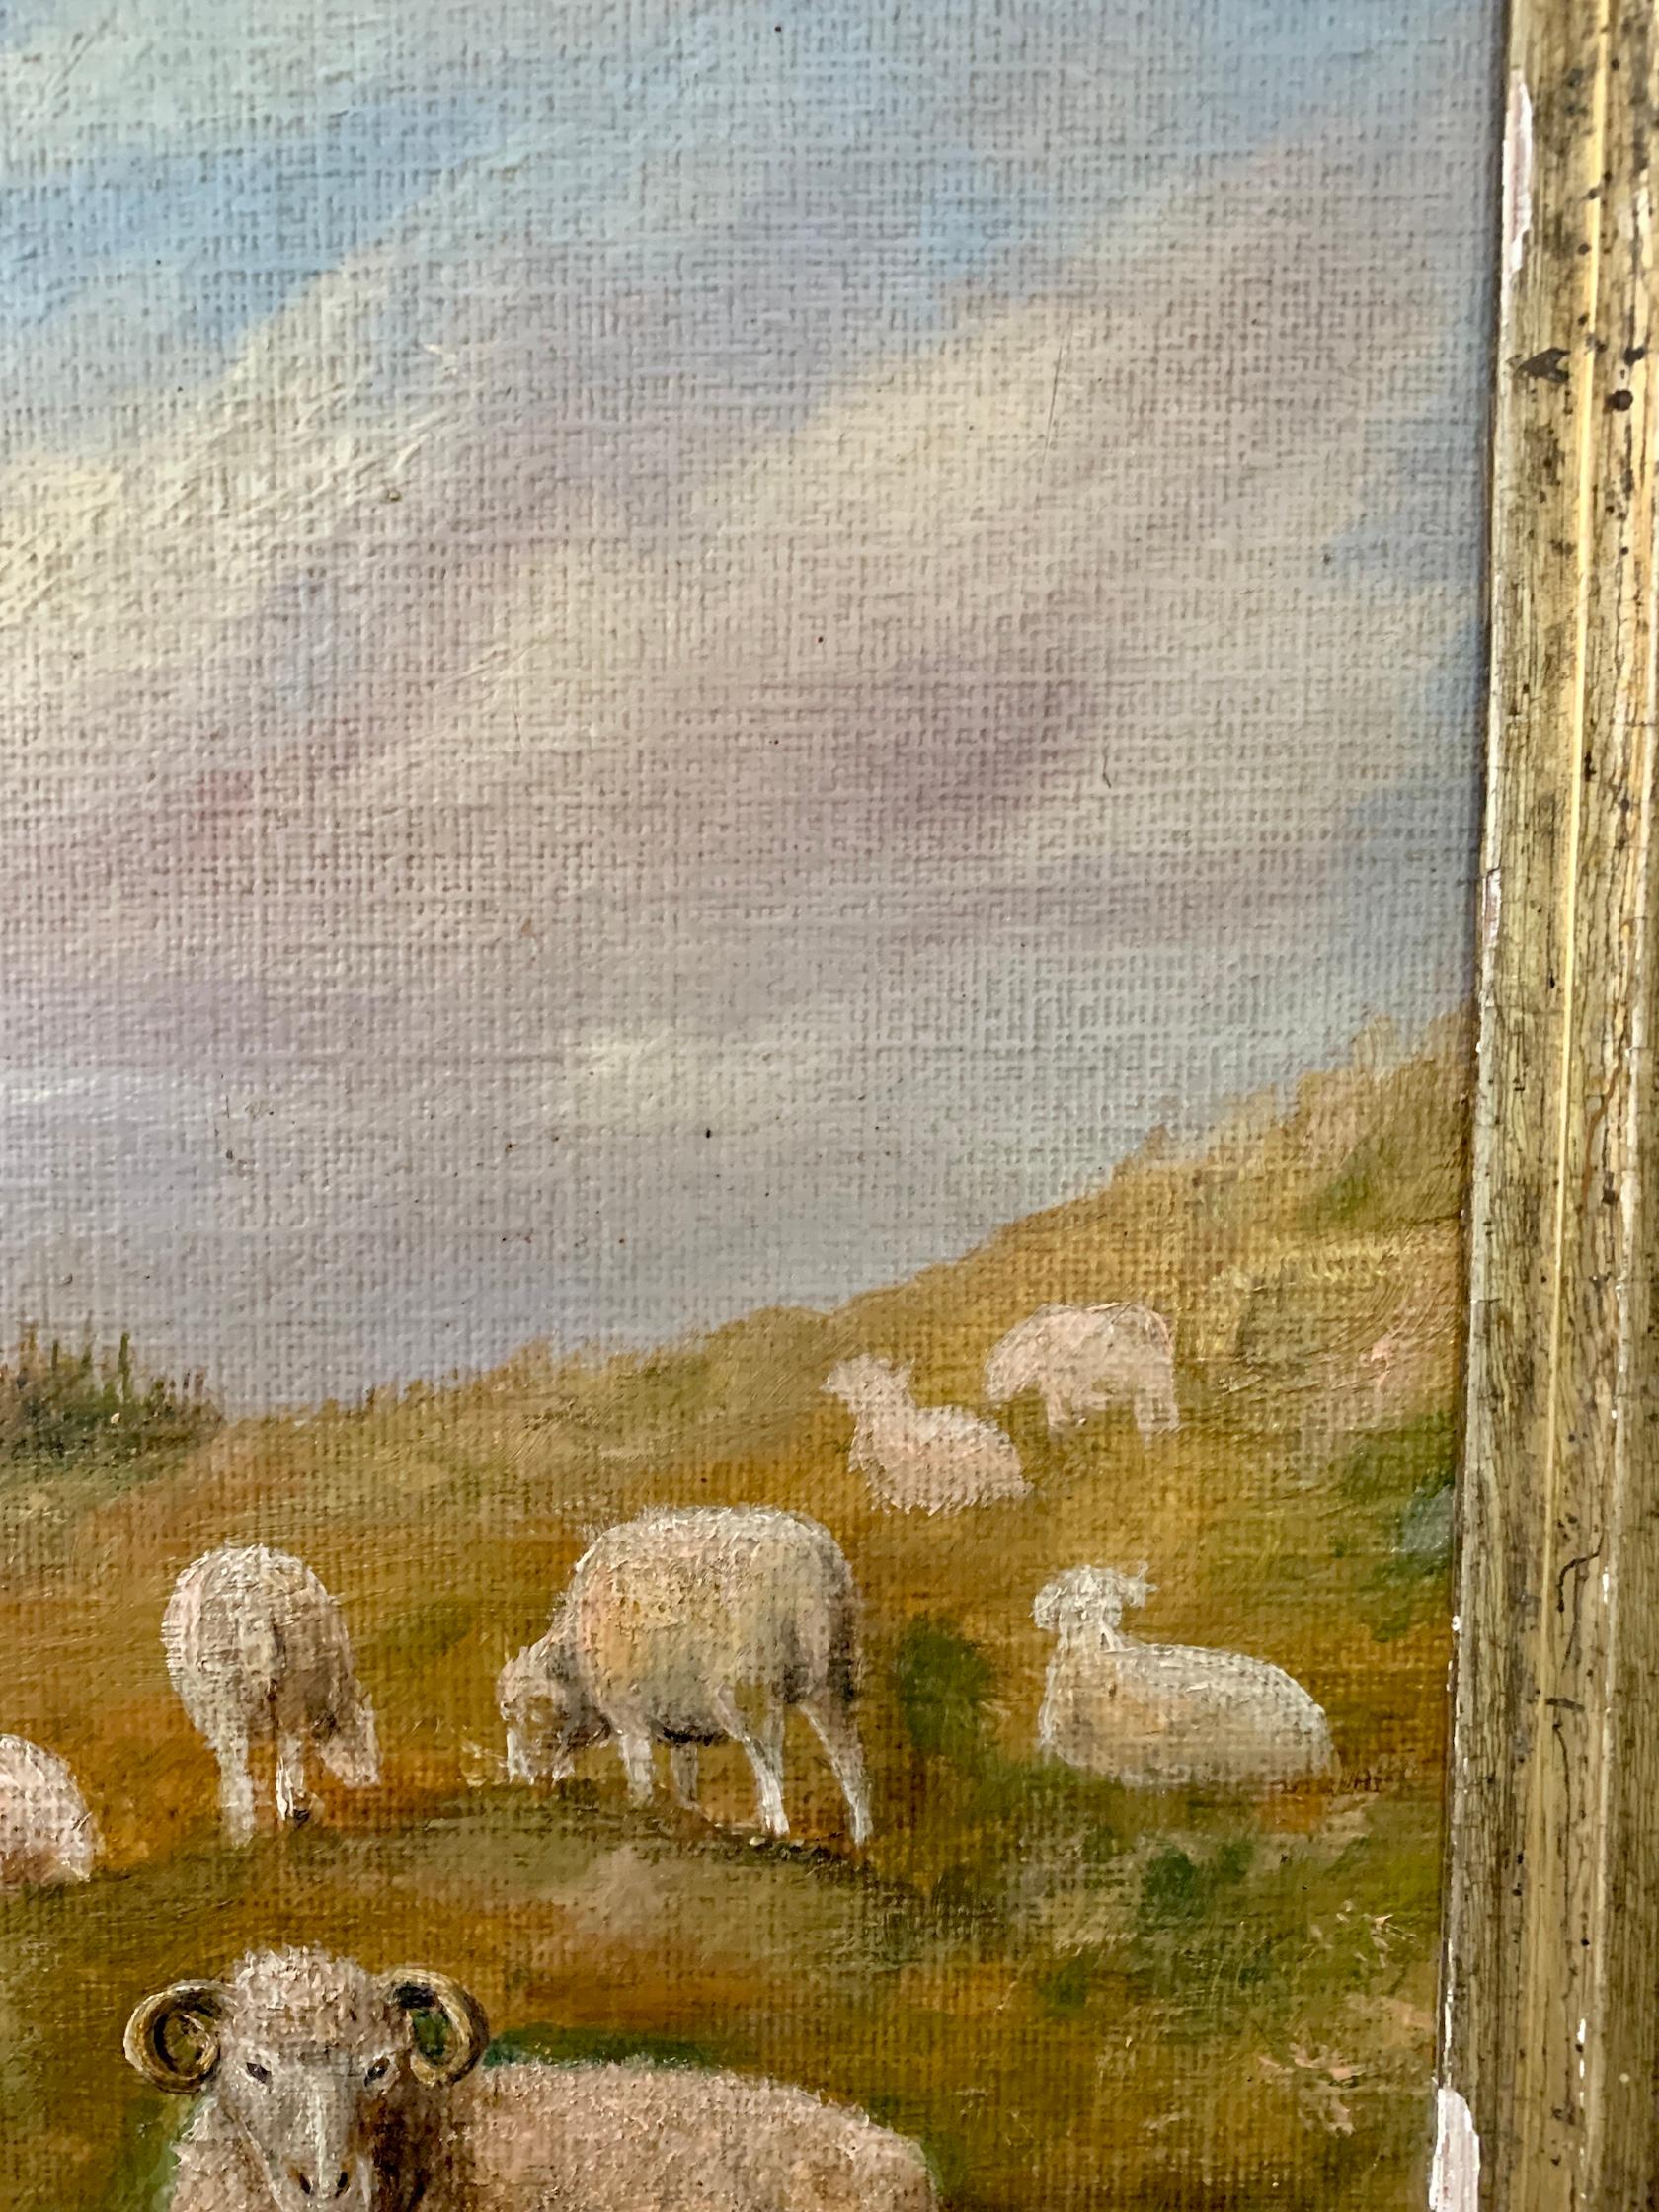 19th Century English folk art of Sheep in a landscape with maple frame For Sale 1